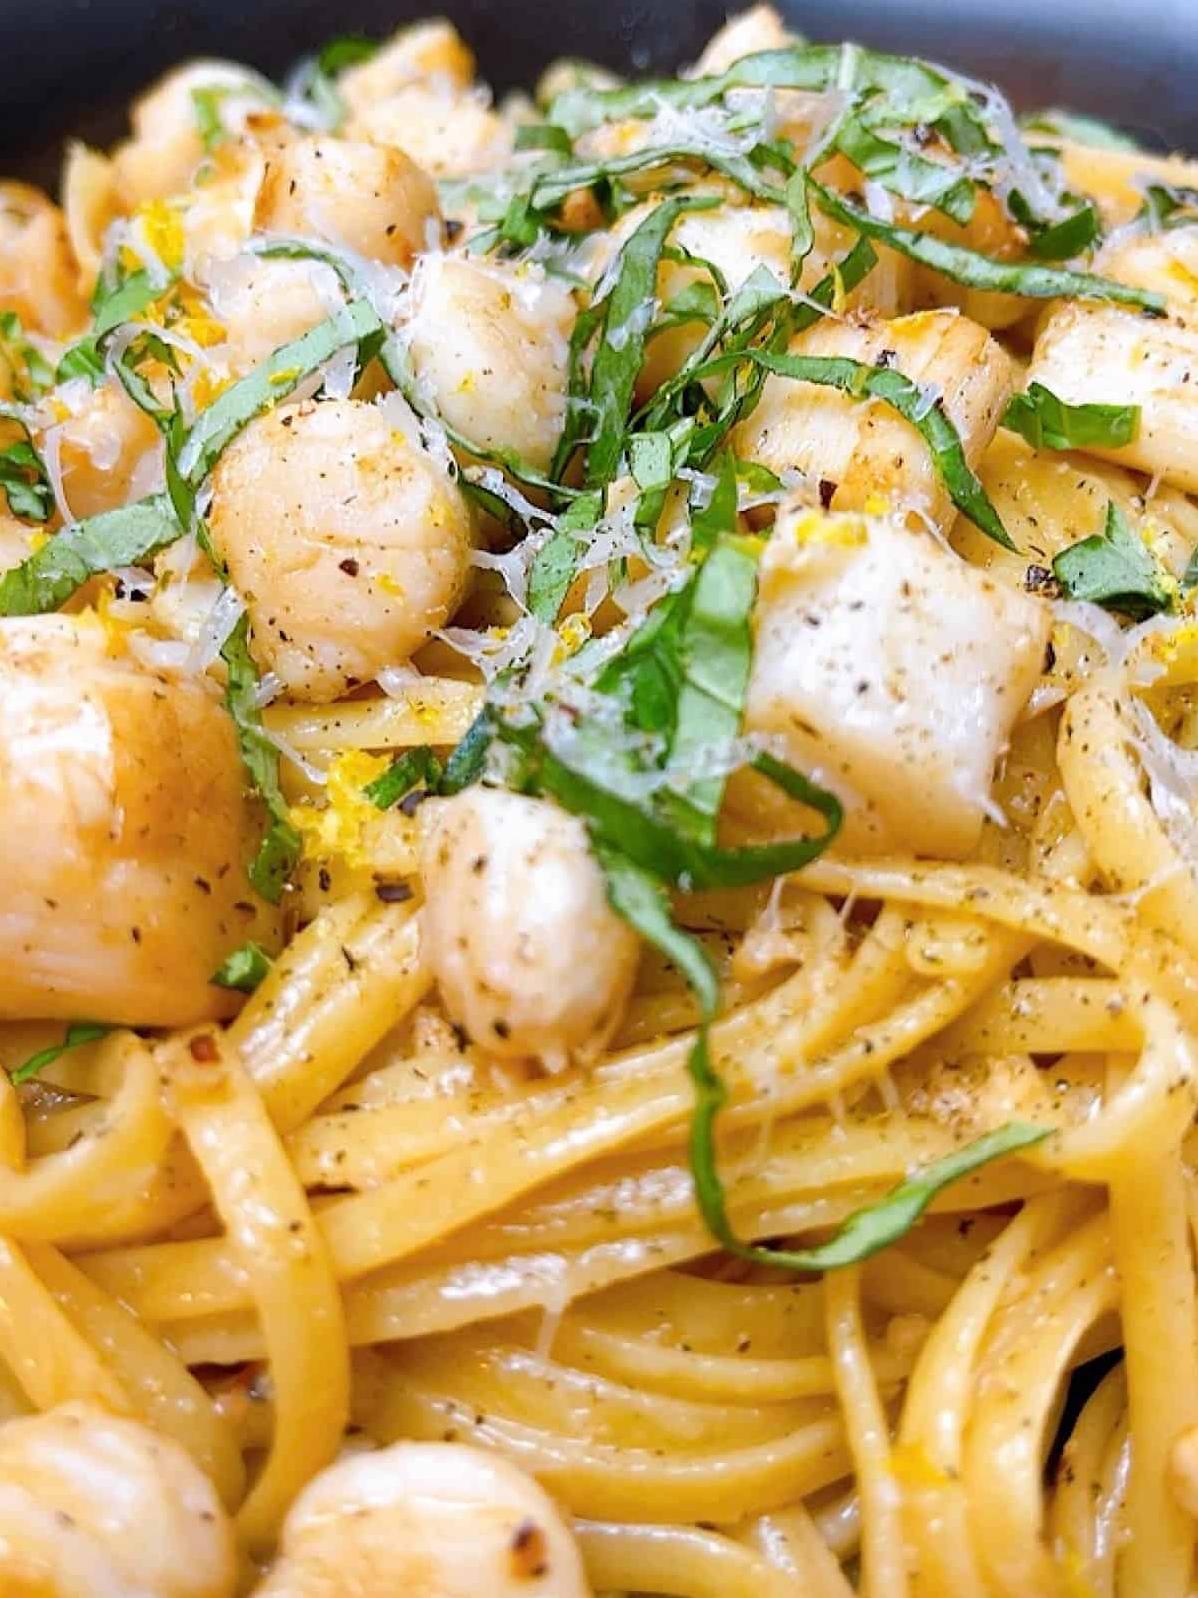  A dish that's both fancy and easy to make, scallops in wine is perfect for any occasion.